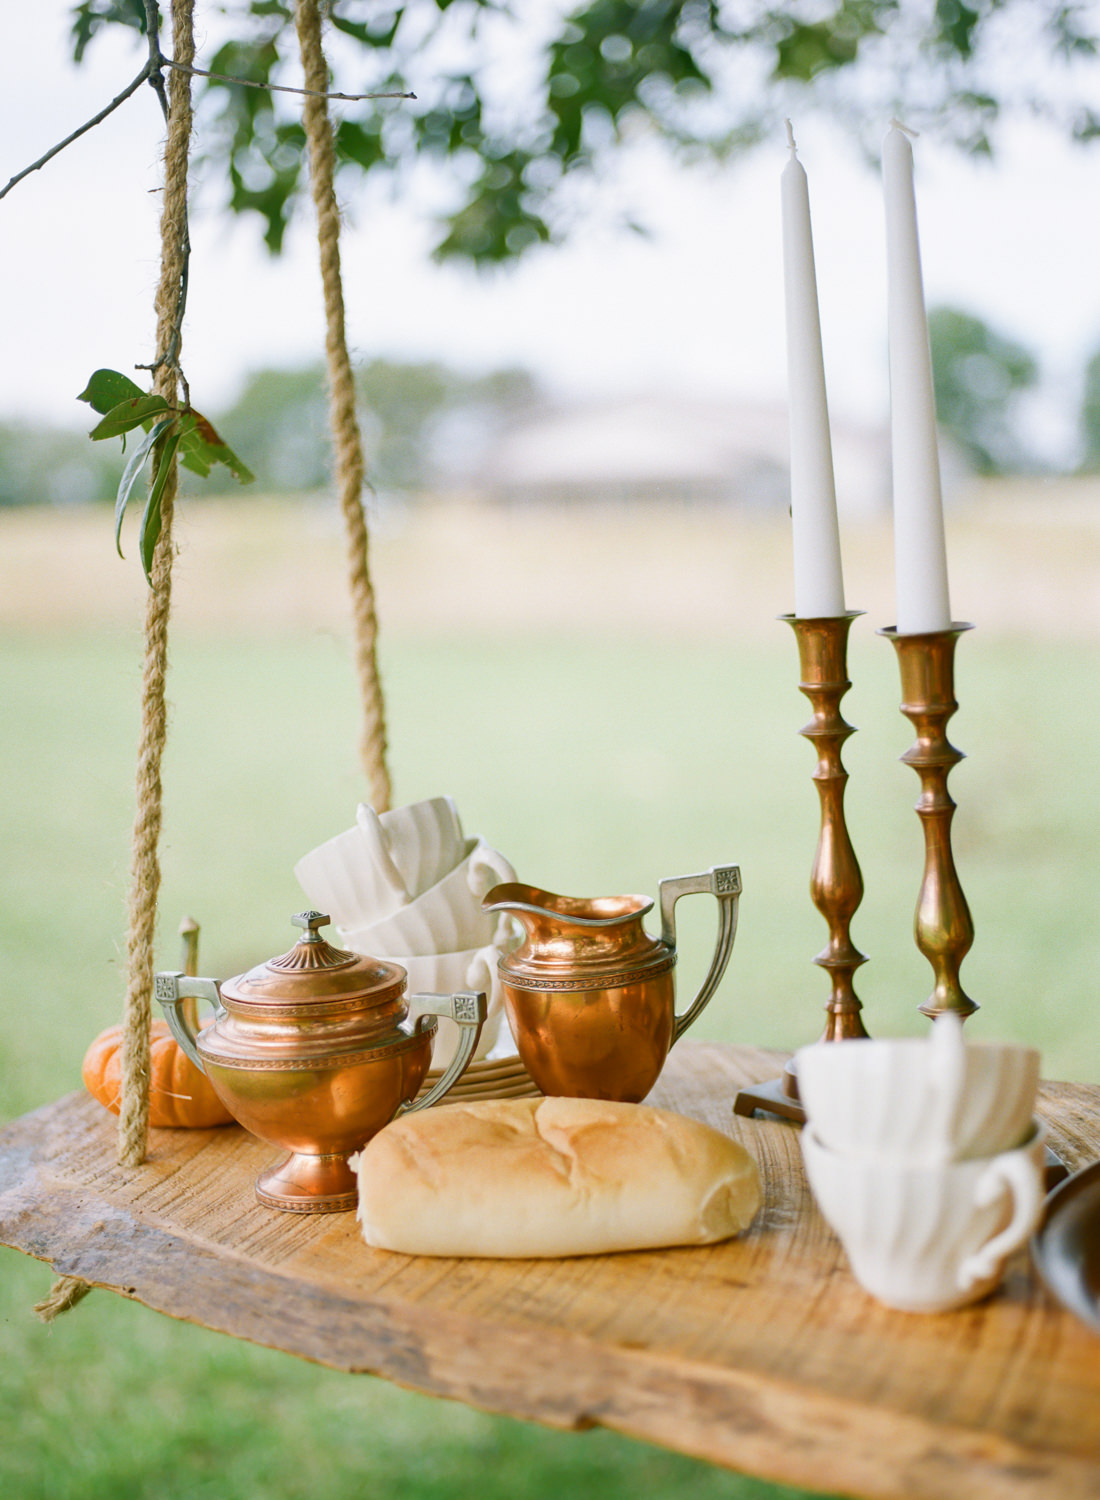 Copper serving dishes, bread loaf, white china, Thanksgiving table at Emerson Fields; St. Louis fine art film wedding photographer Erica Robnett Photography